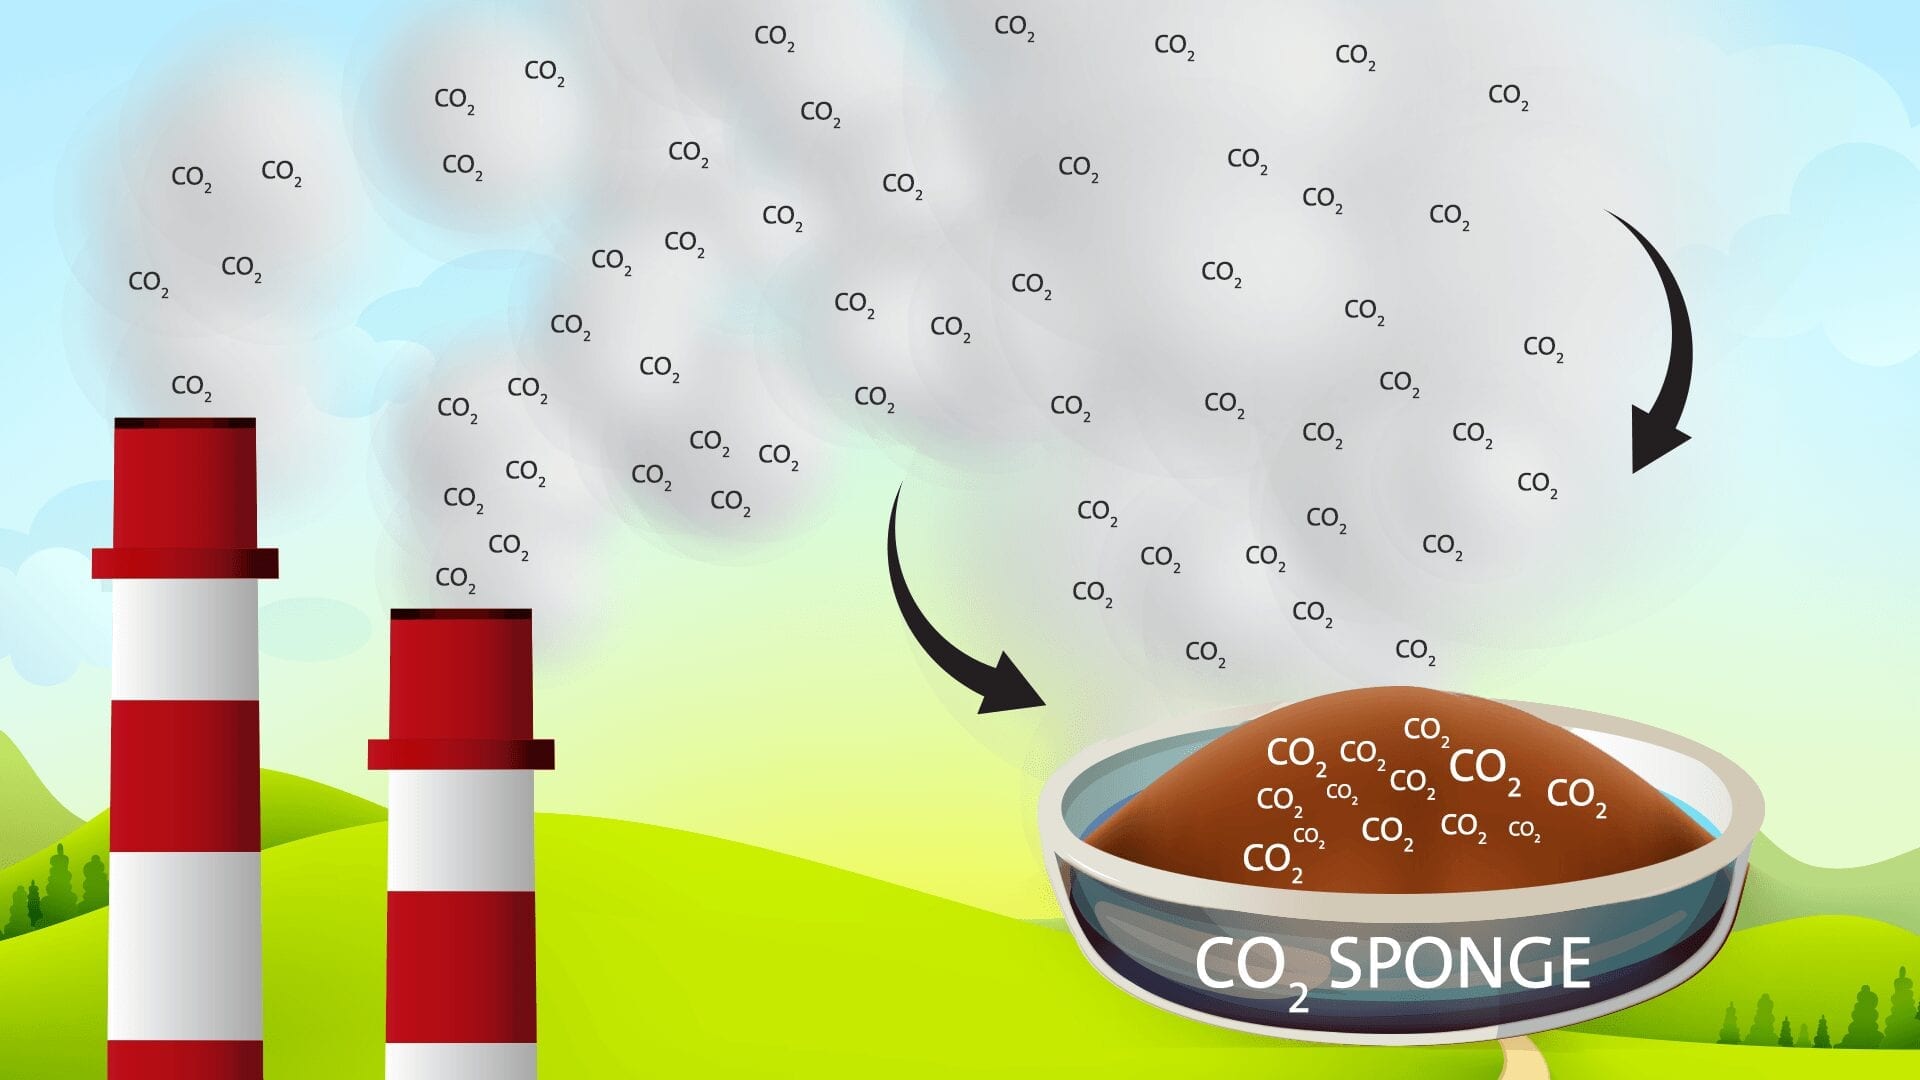 Carbon Dioxide ‘Sponge’ Could Ease Transition to Cleaner Energy?